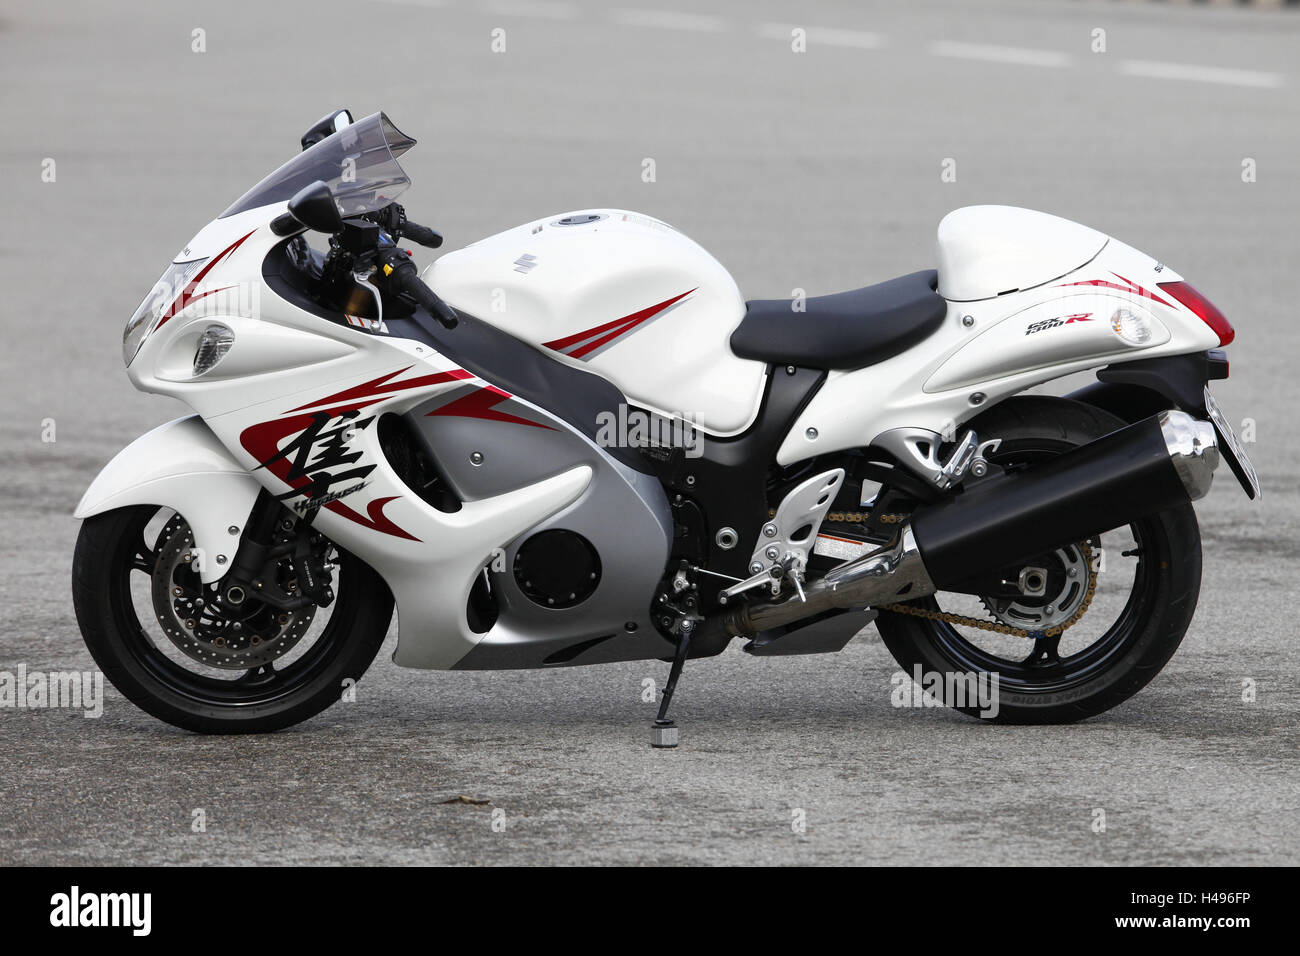 Motorcycle, Hayabusa GSX 1300 R, Sporttourer, vertical, left page, Stock Photo